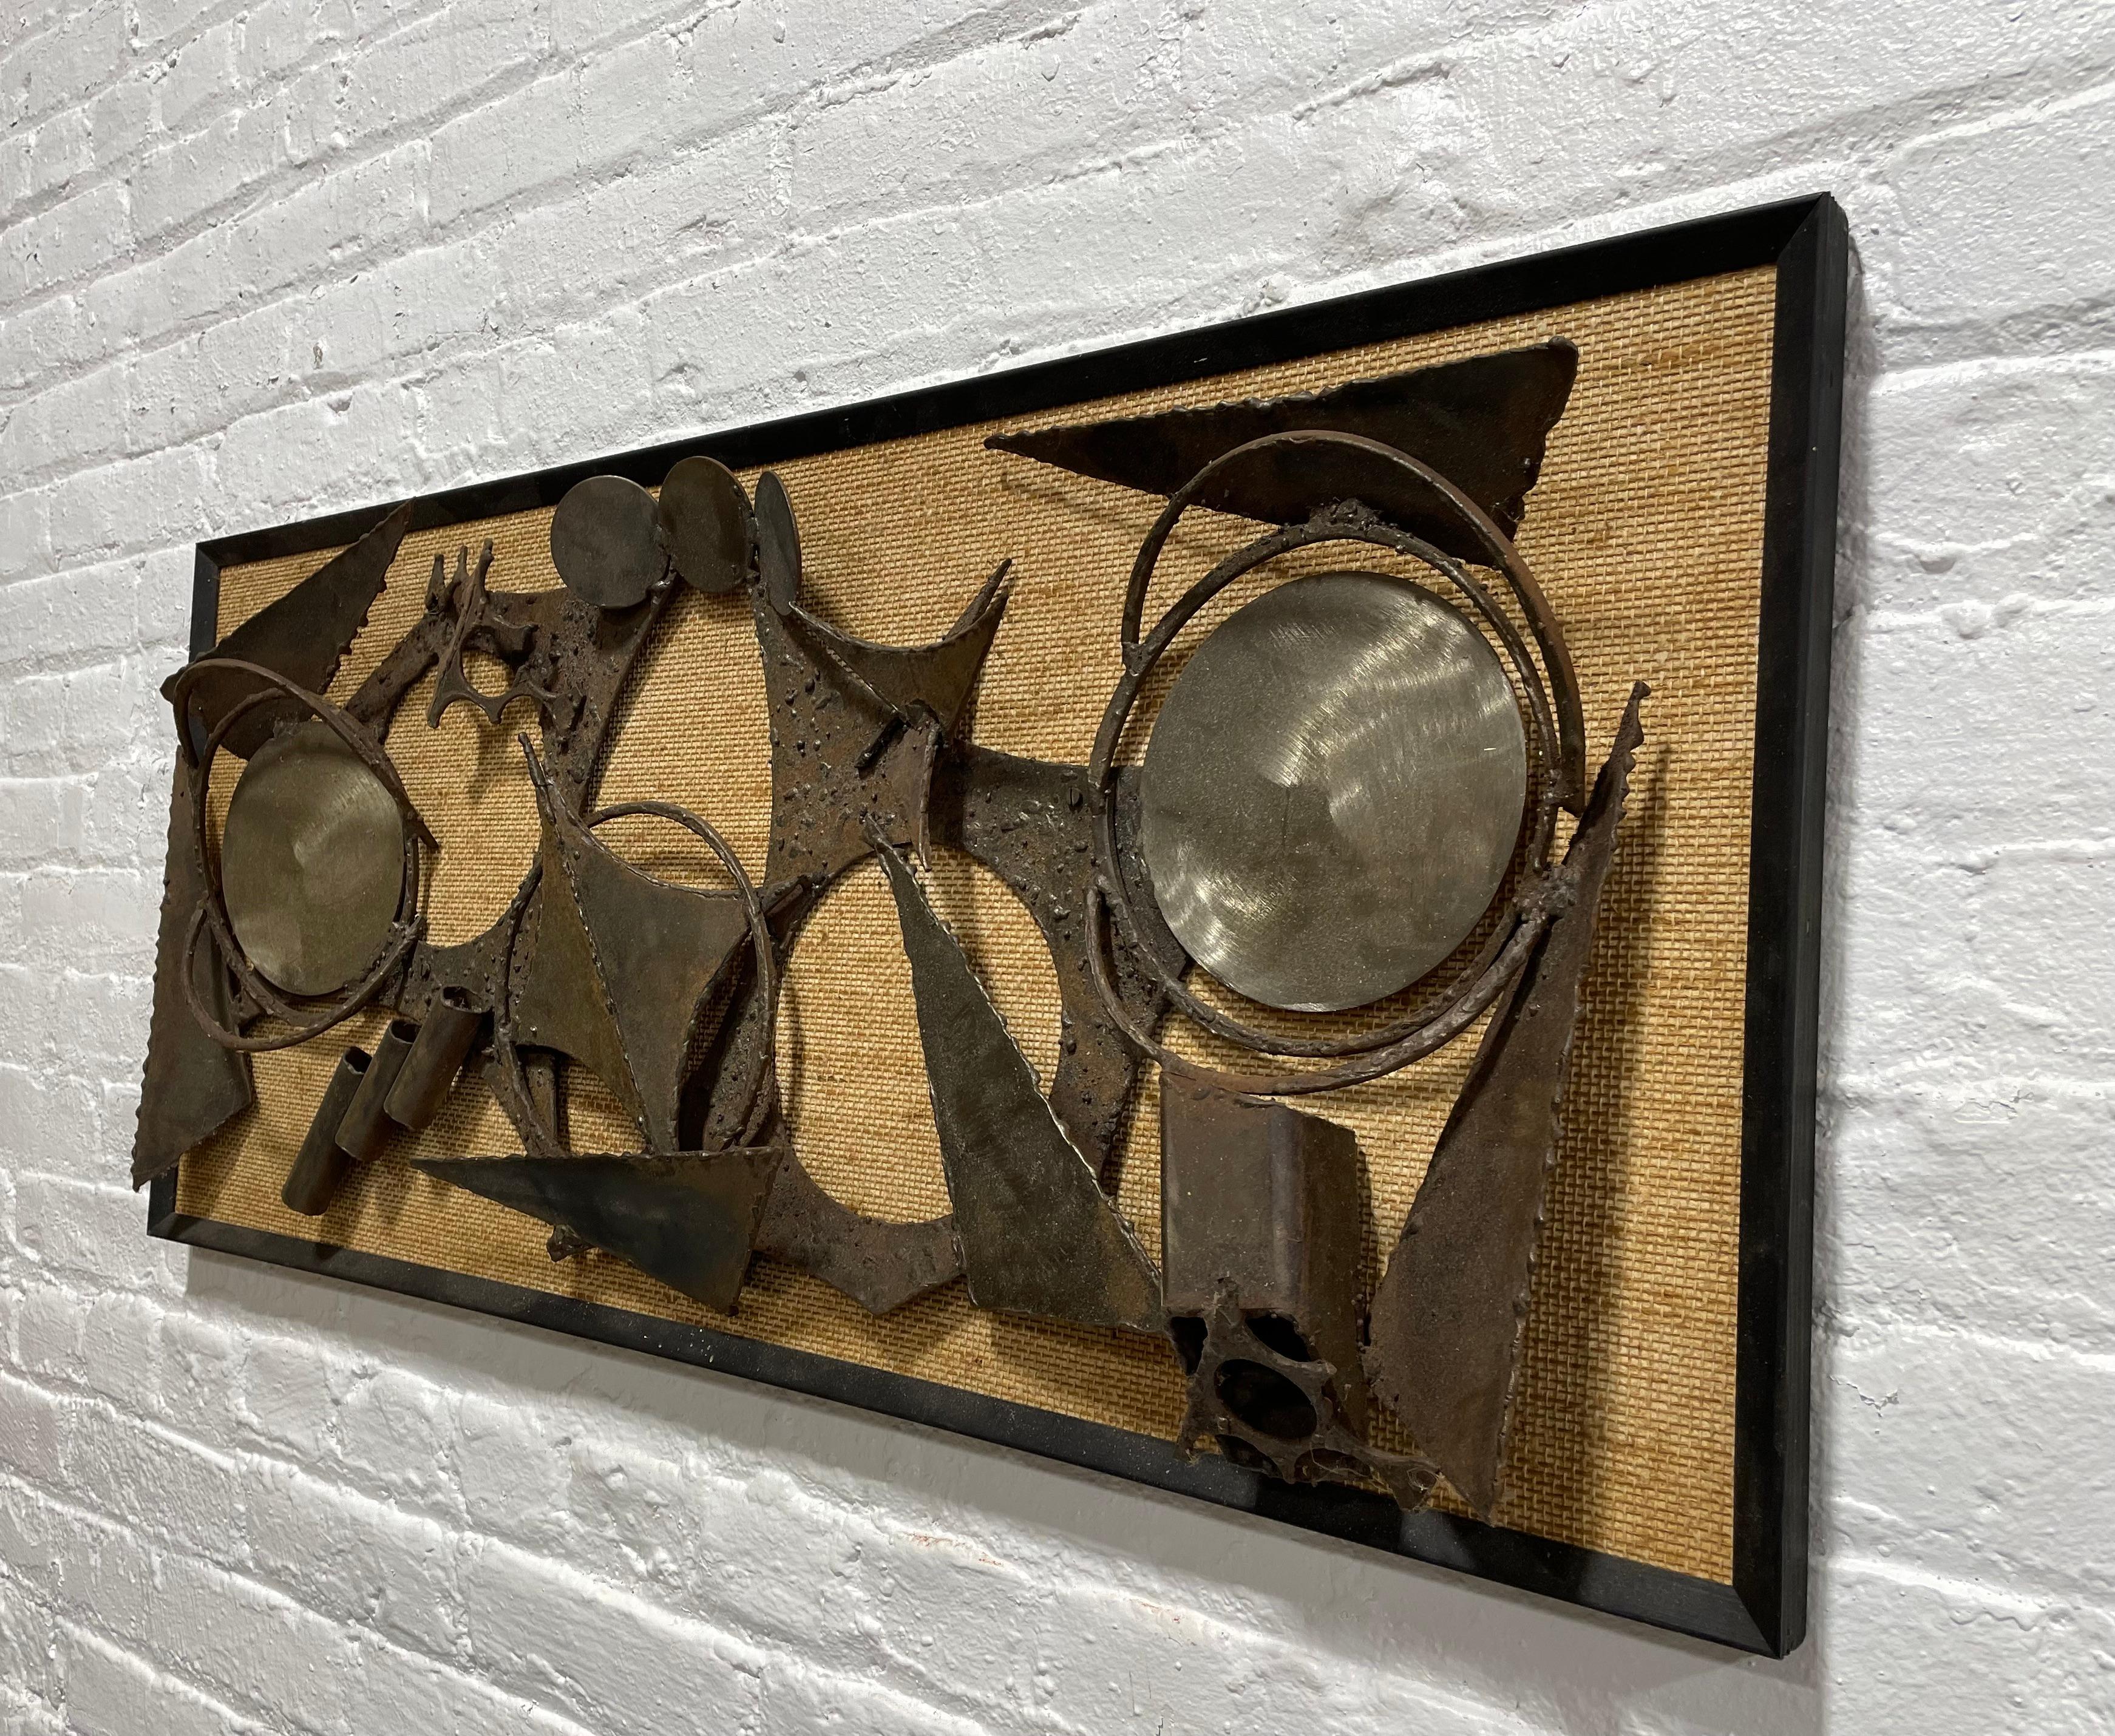 Large framed Mid Century Modern Brutalist Artwork.  Torch-cut and welded metal on grasscloth textile. Unsigned.  Incredible piece, heavy and well made. A few nicks and scuffs, as expected for a vintage piece. Ready to hang.